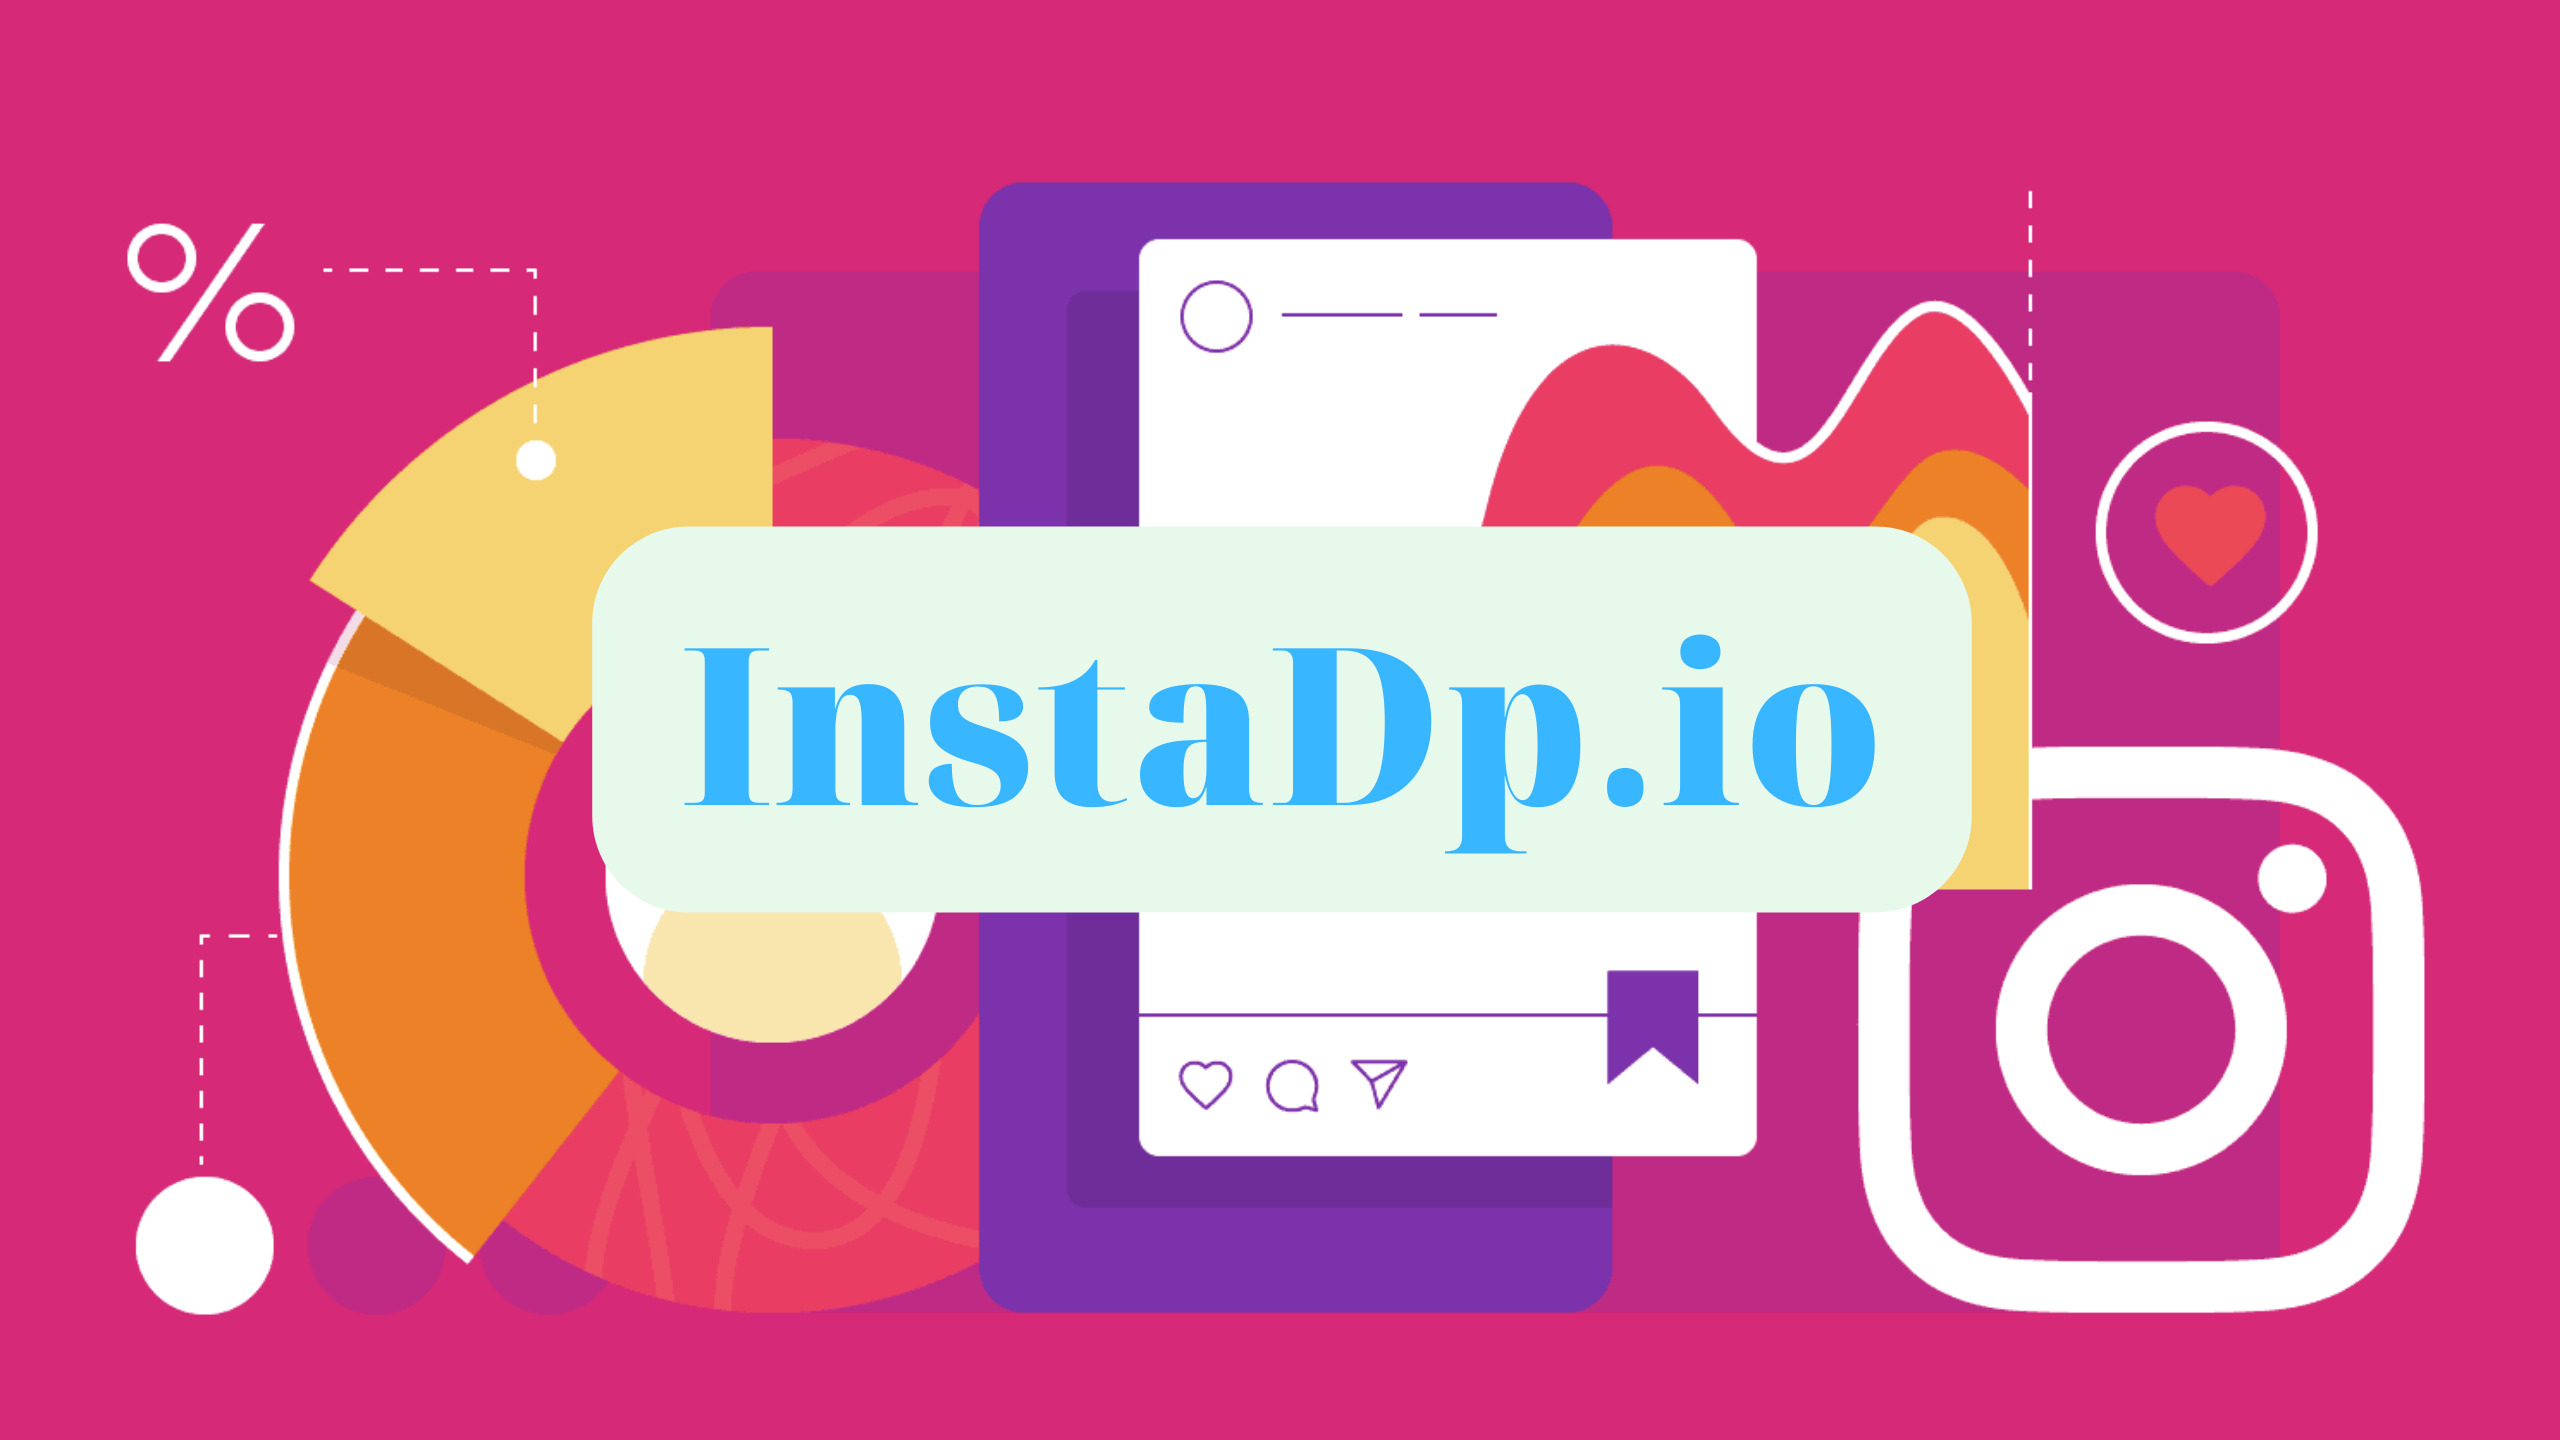 What Is InstaDp?